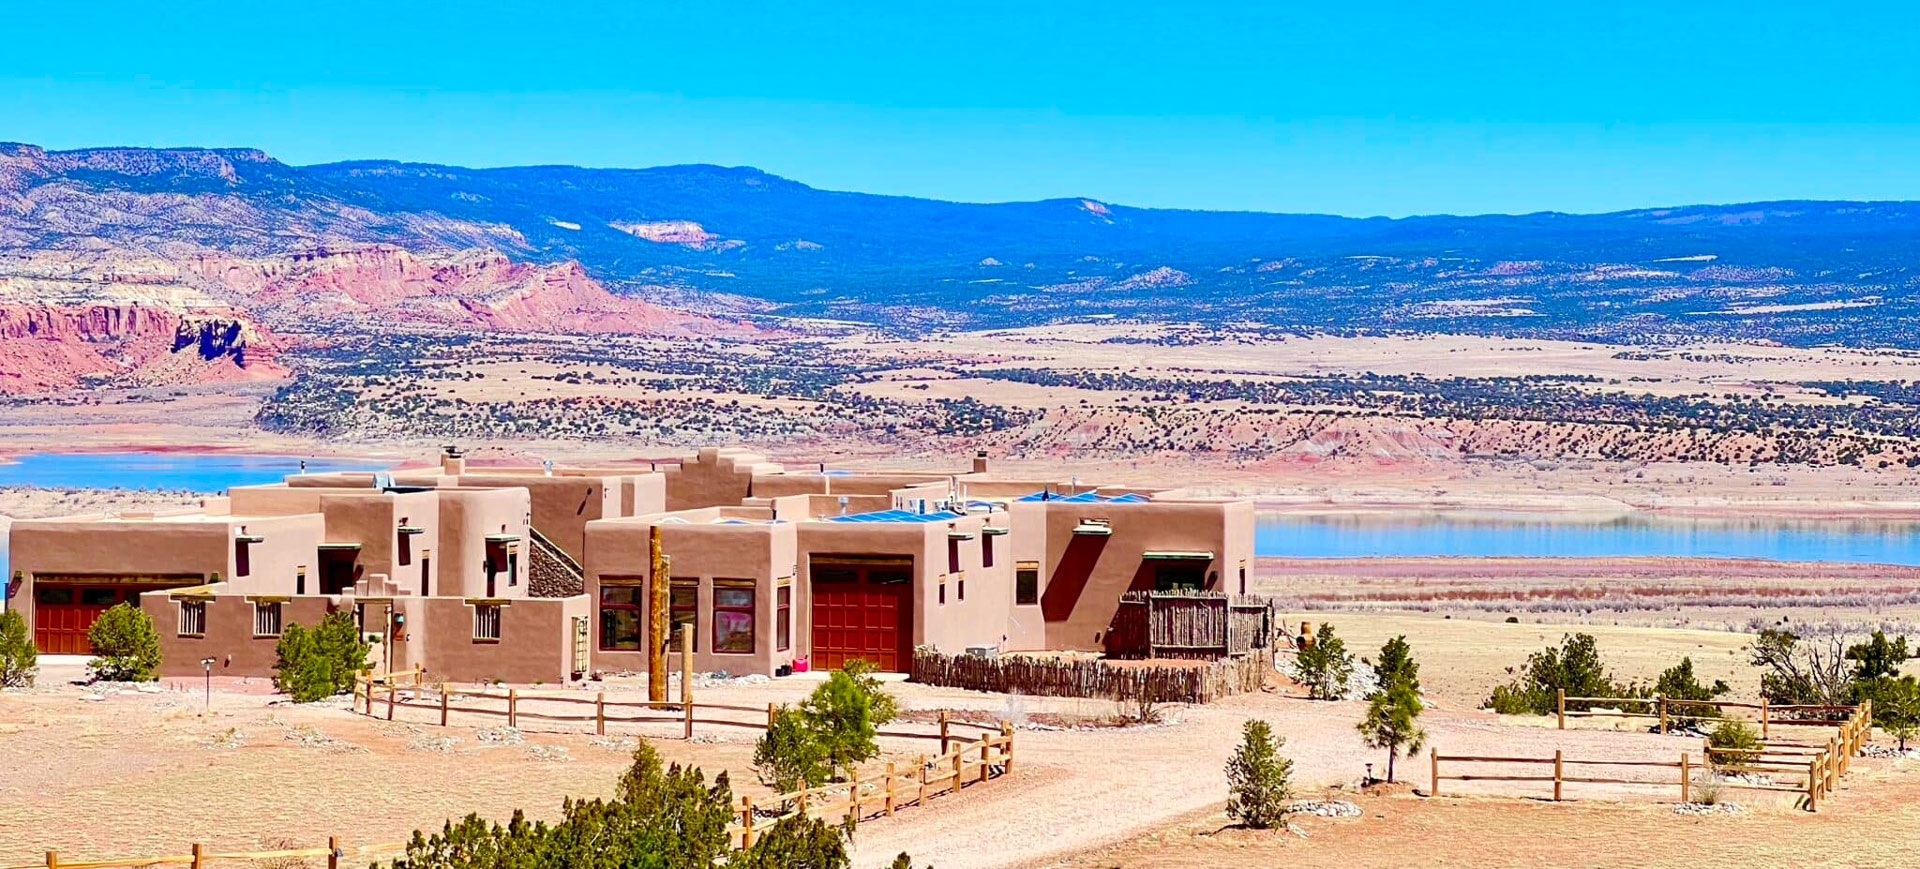 The Grand Hacienda resort overlooking Lake Abiquiu in New Mexico is a great adventure vacation destination.